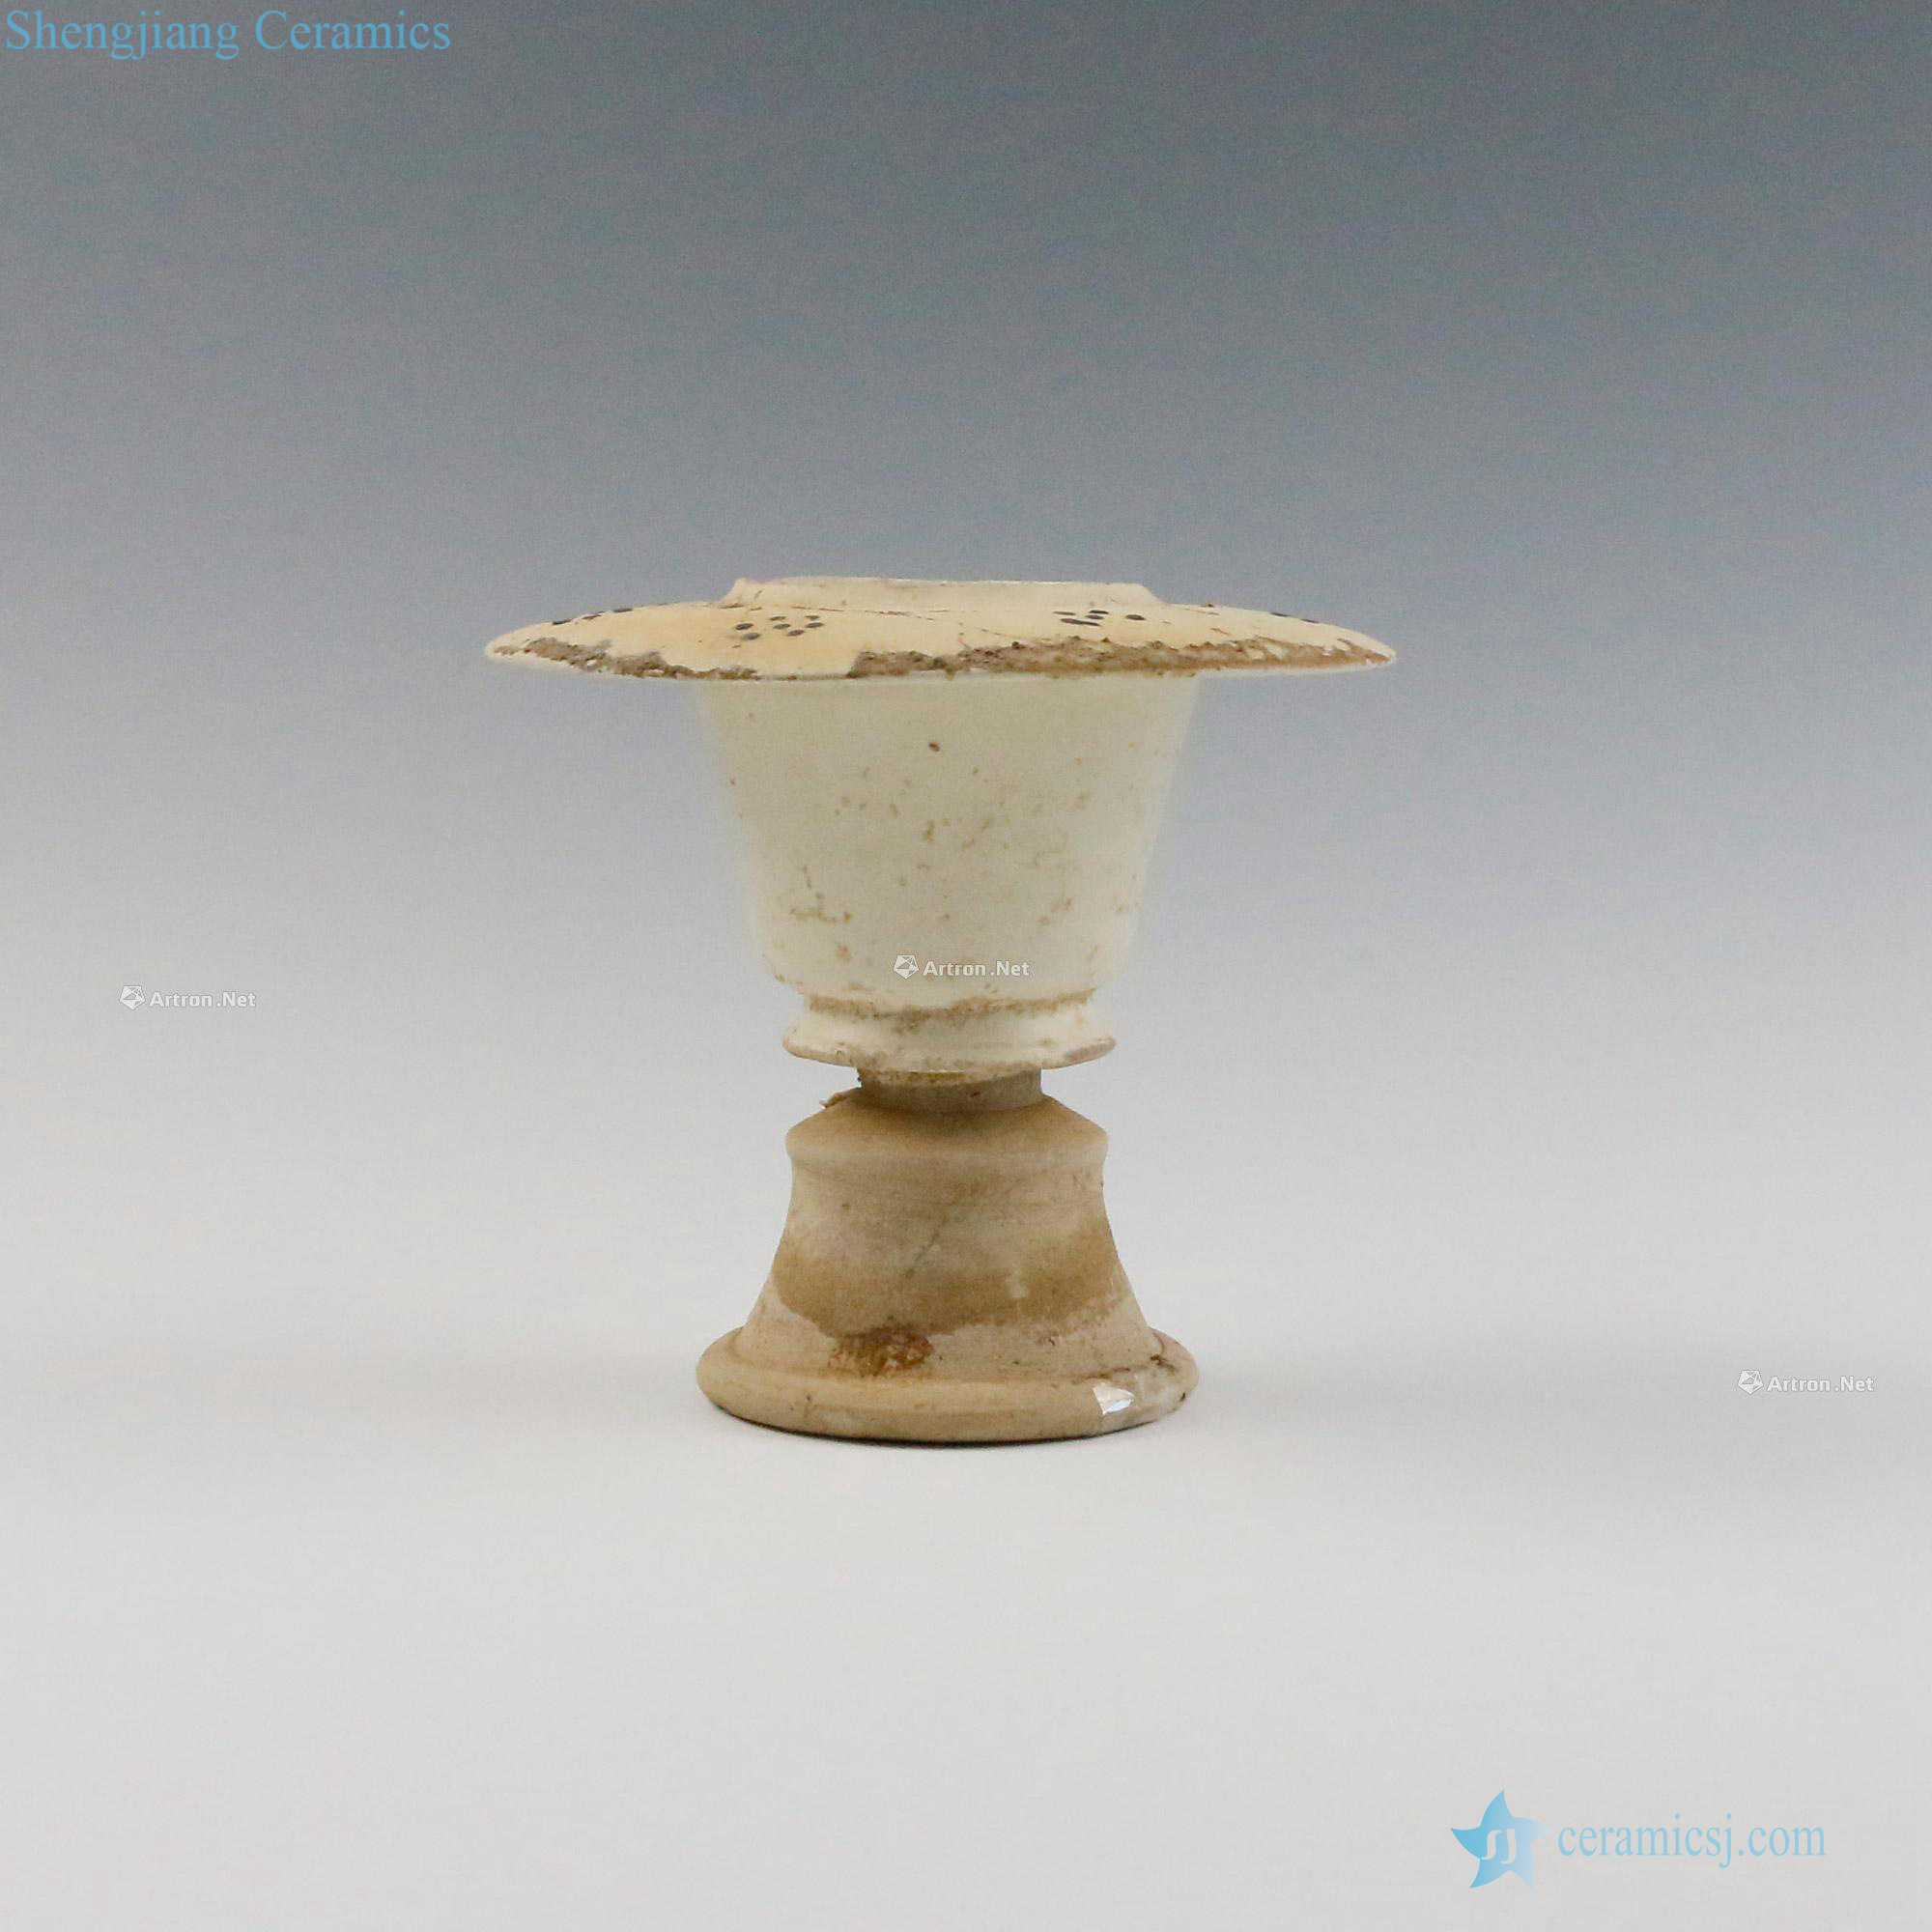 Song magnetic state kiln candlestick